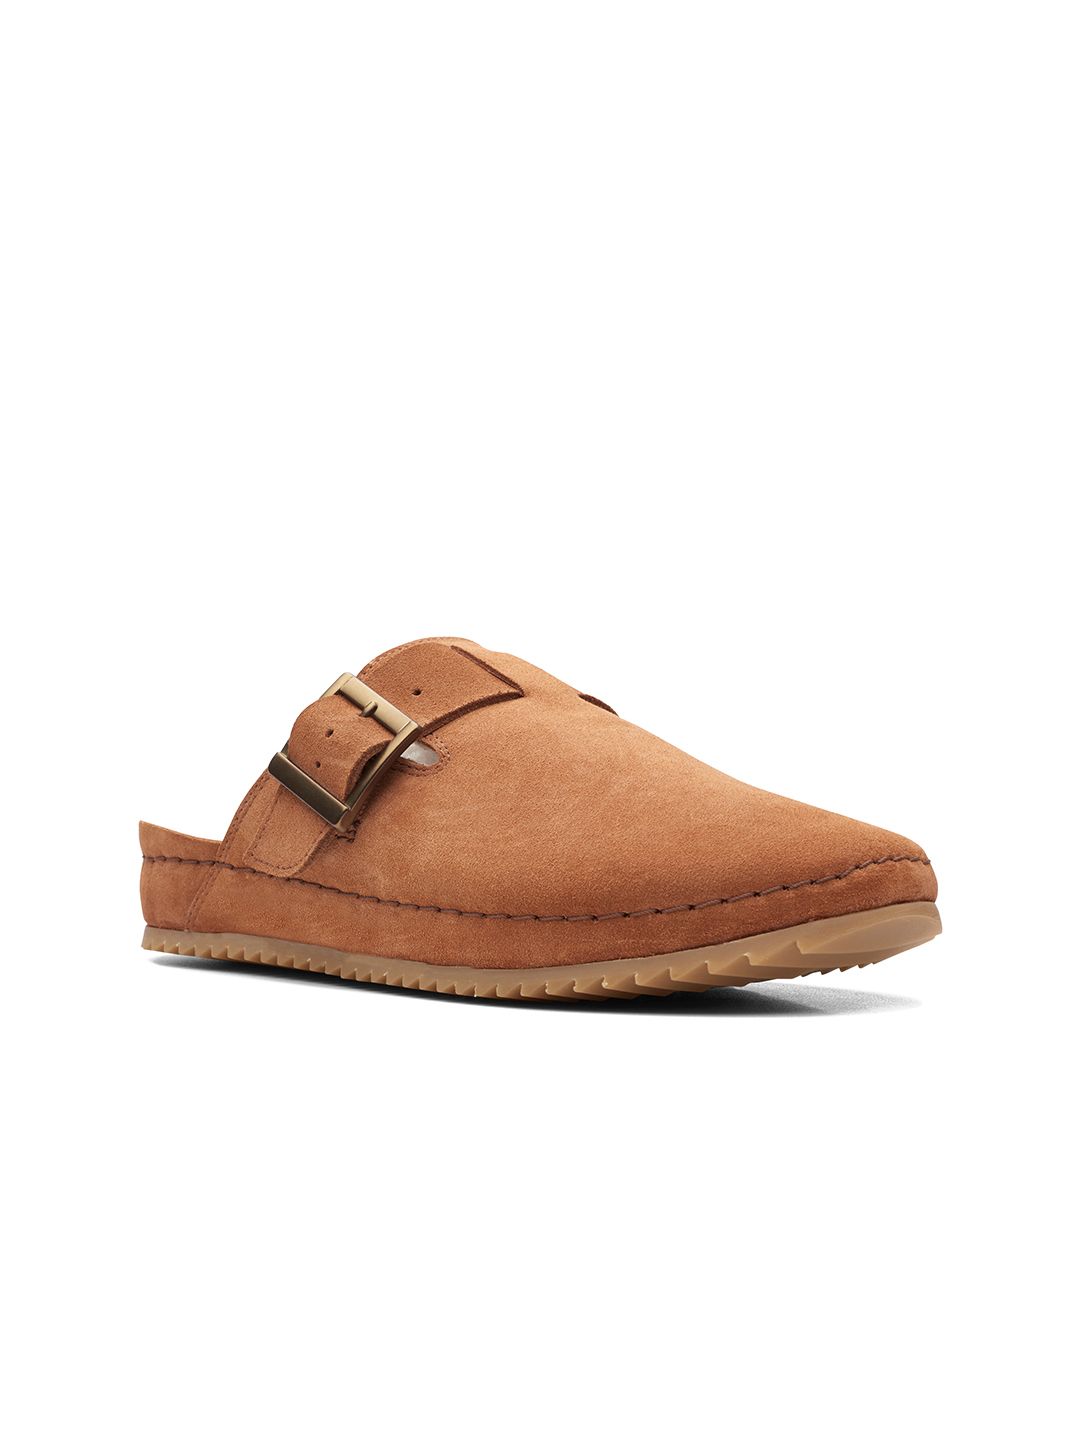 Clarks Women Brown Suede Mules Price in India